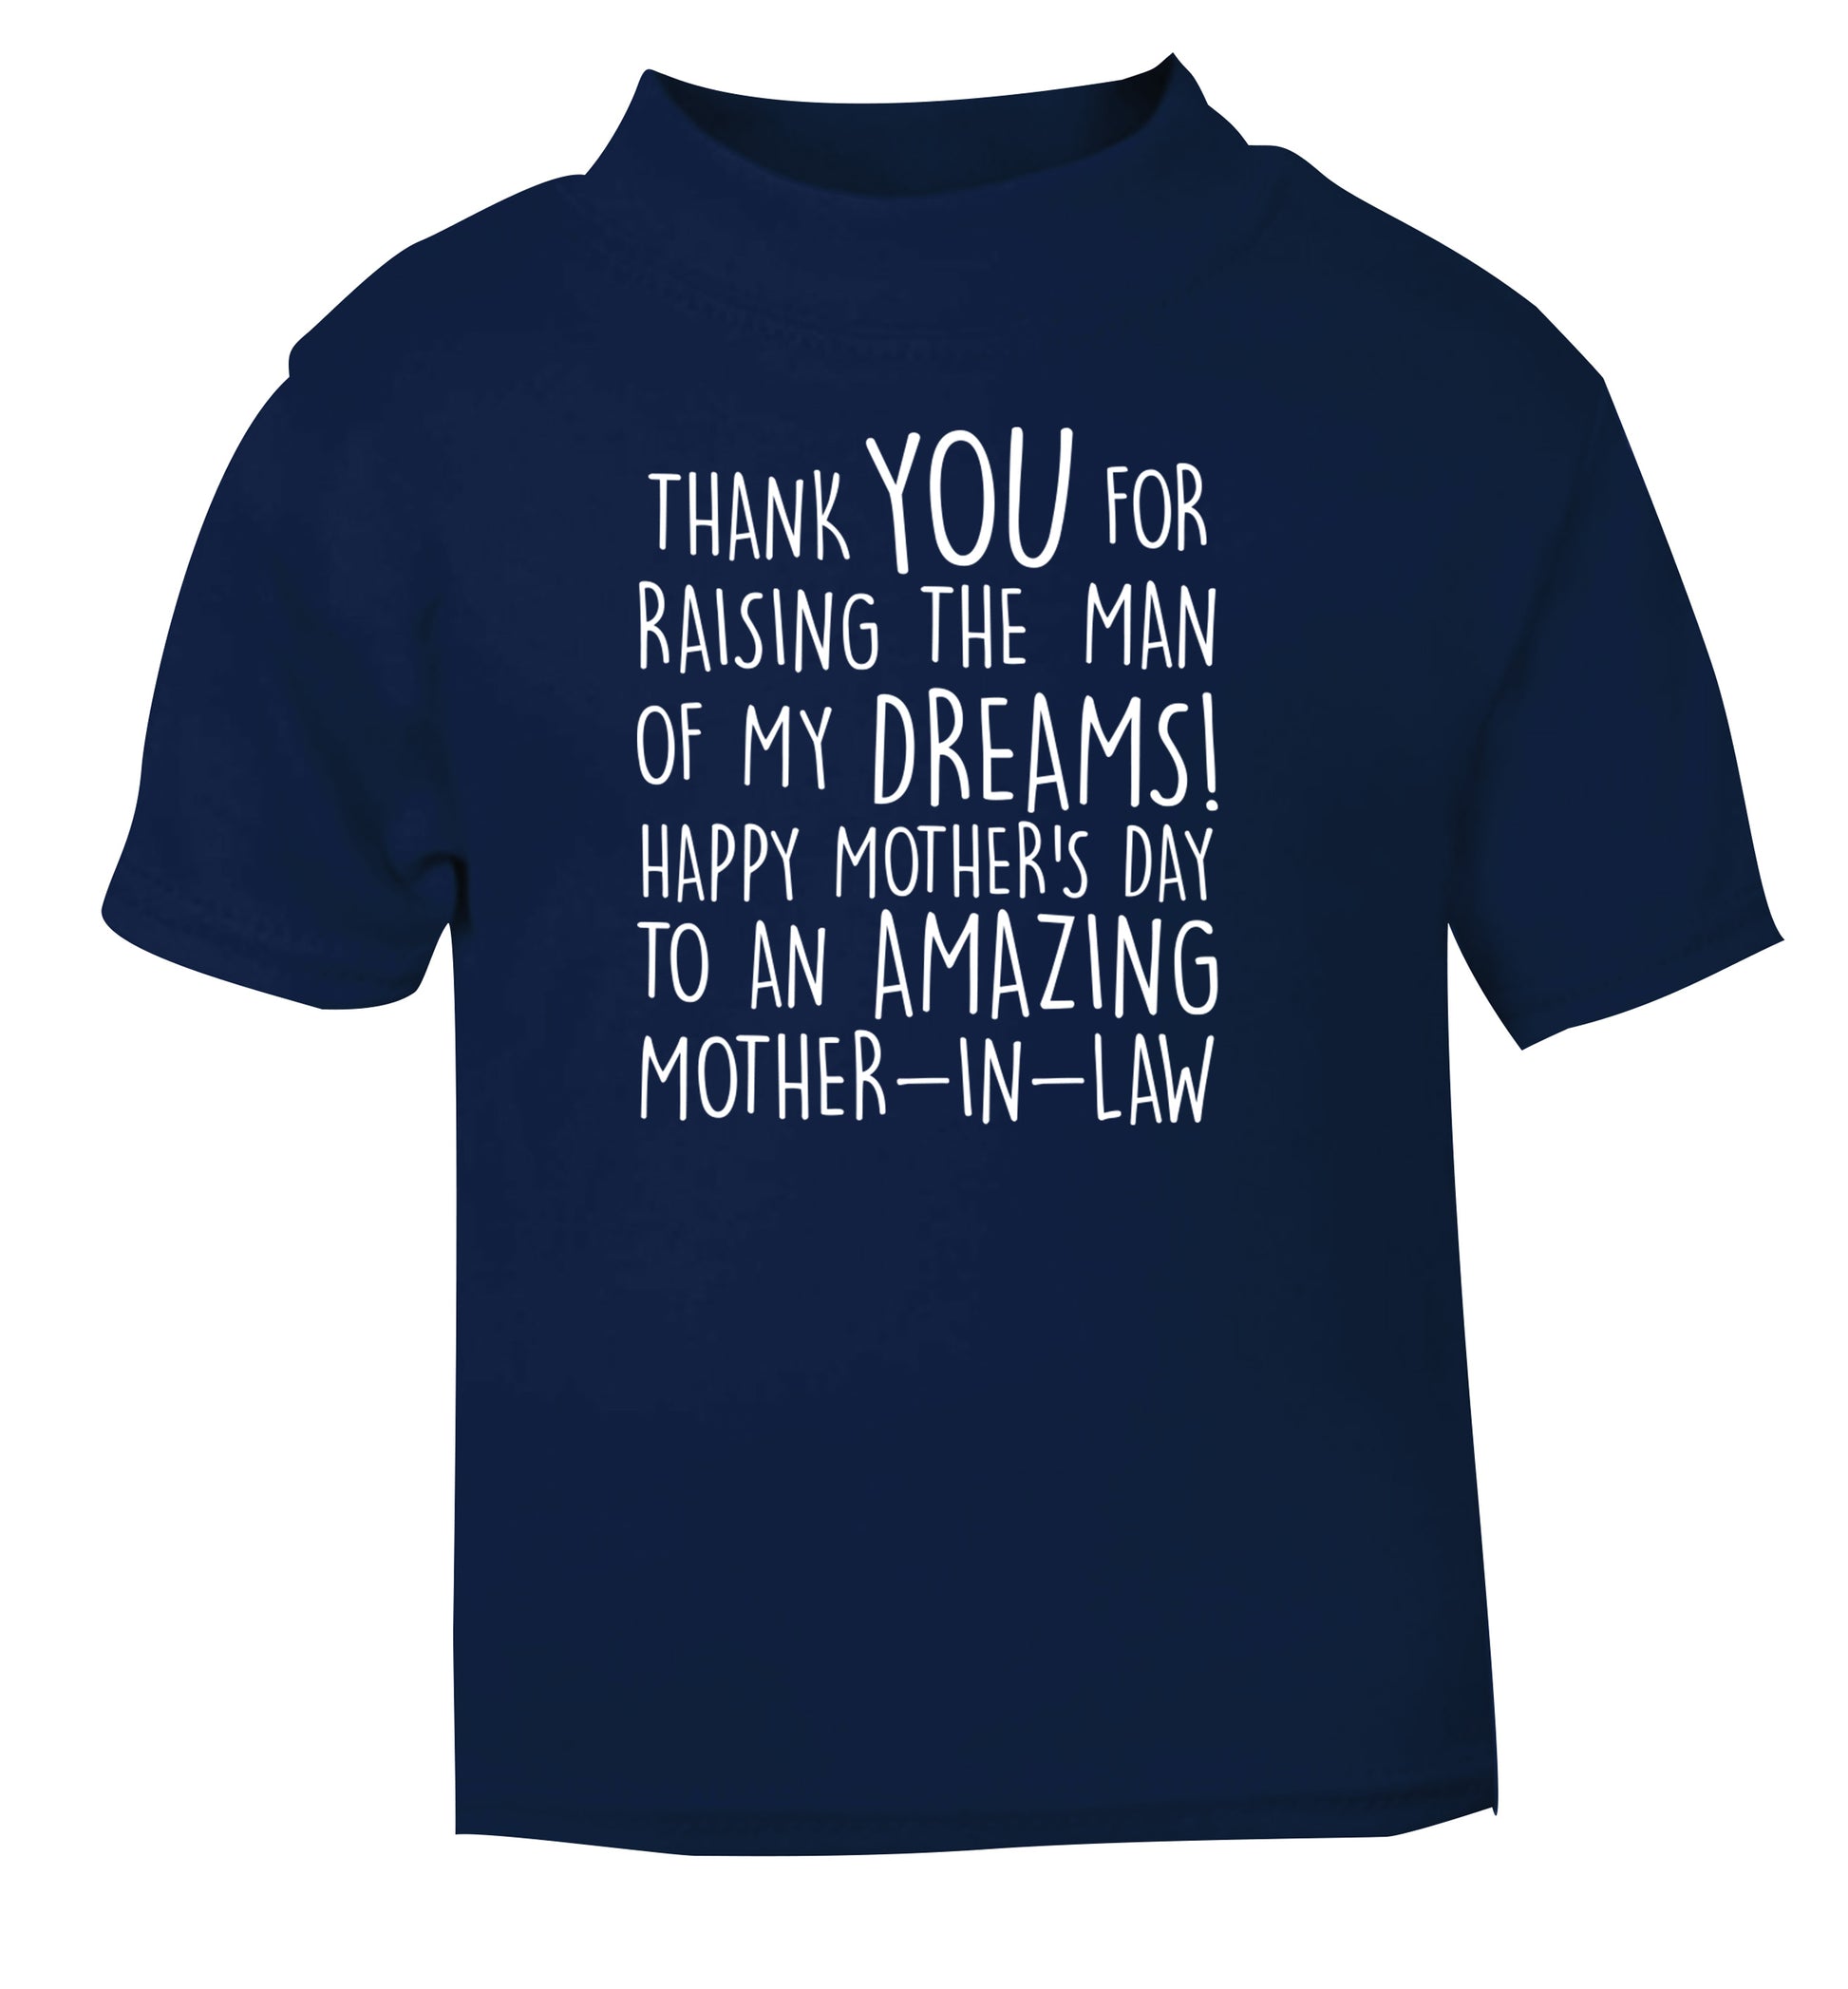 Thank you for raising the man of my dreams happy mother's day mother-in-law navy Baby Toddler Tshirt 2 Years